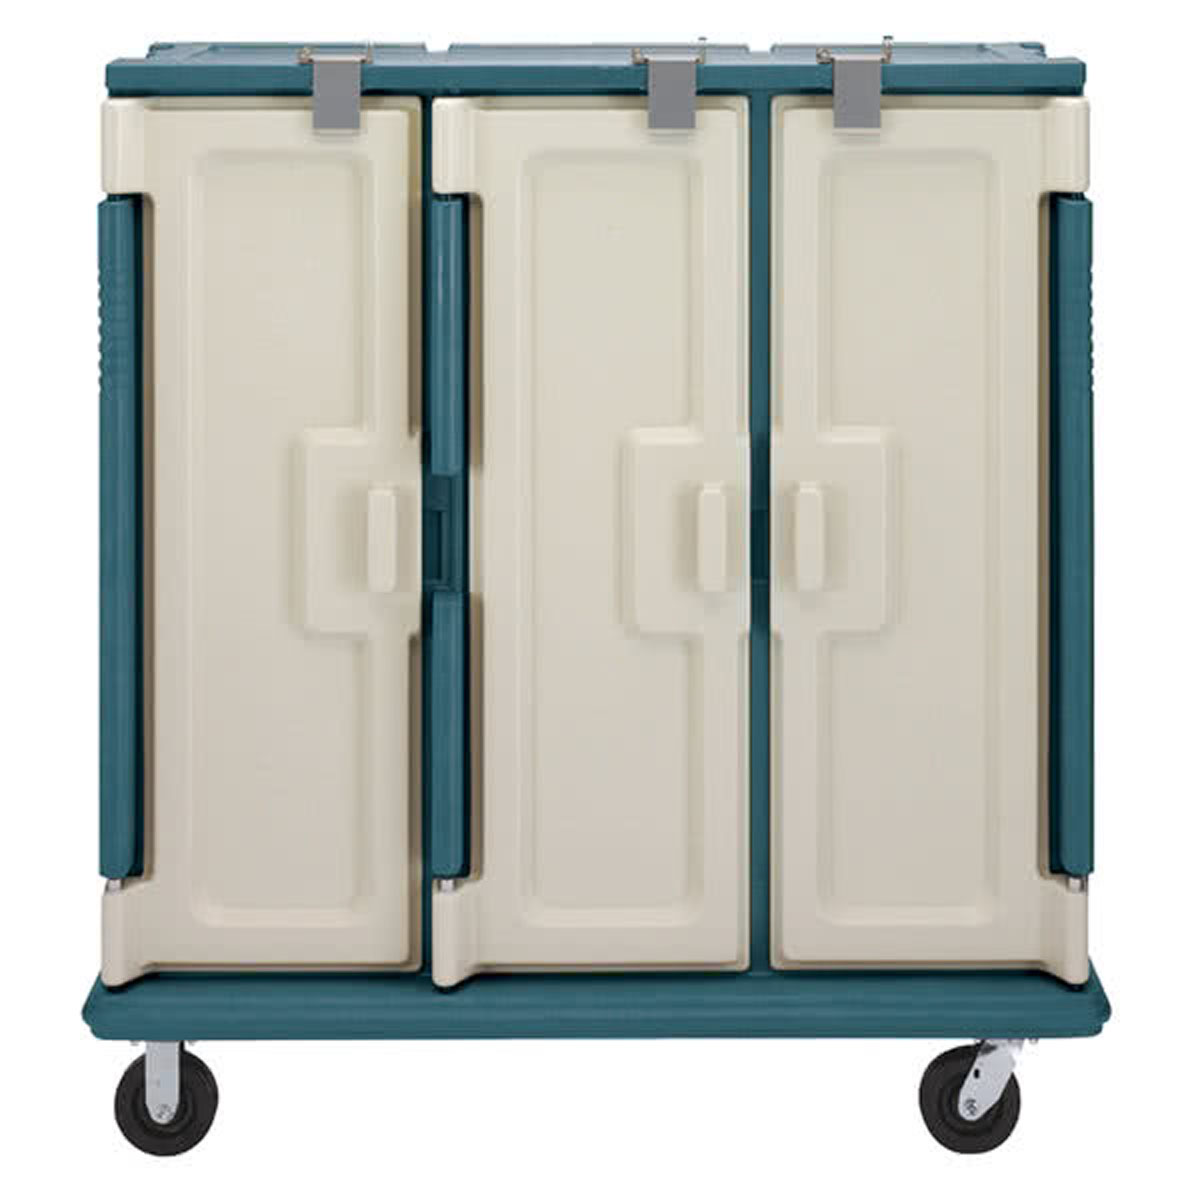 Cambro MDC1520T30192 Meal-Delivery Cart for Tray Service, 3 Compartments for 15'' x 20'' Trays, Tall - Granite Green w/Cream Doors